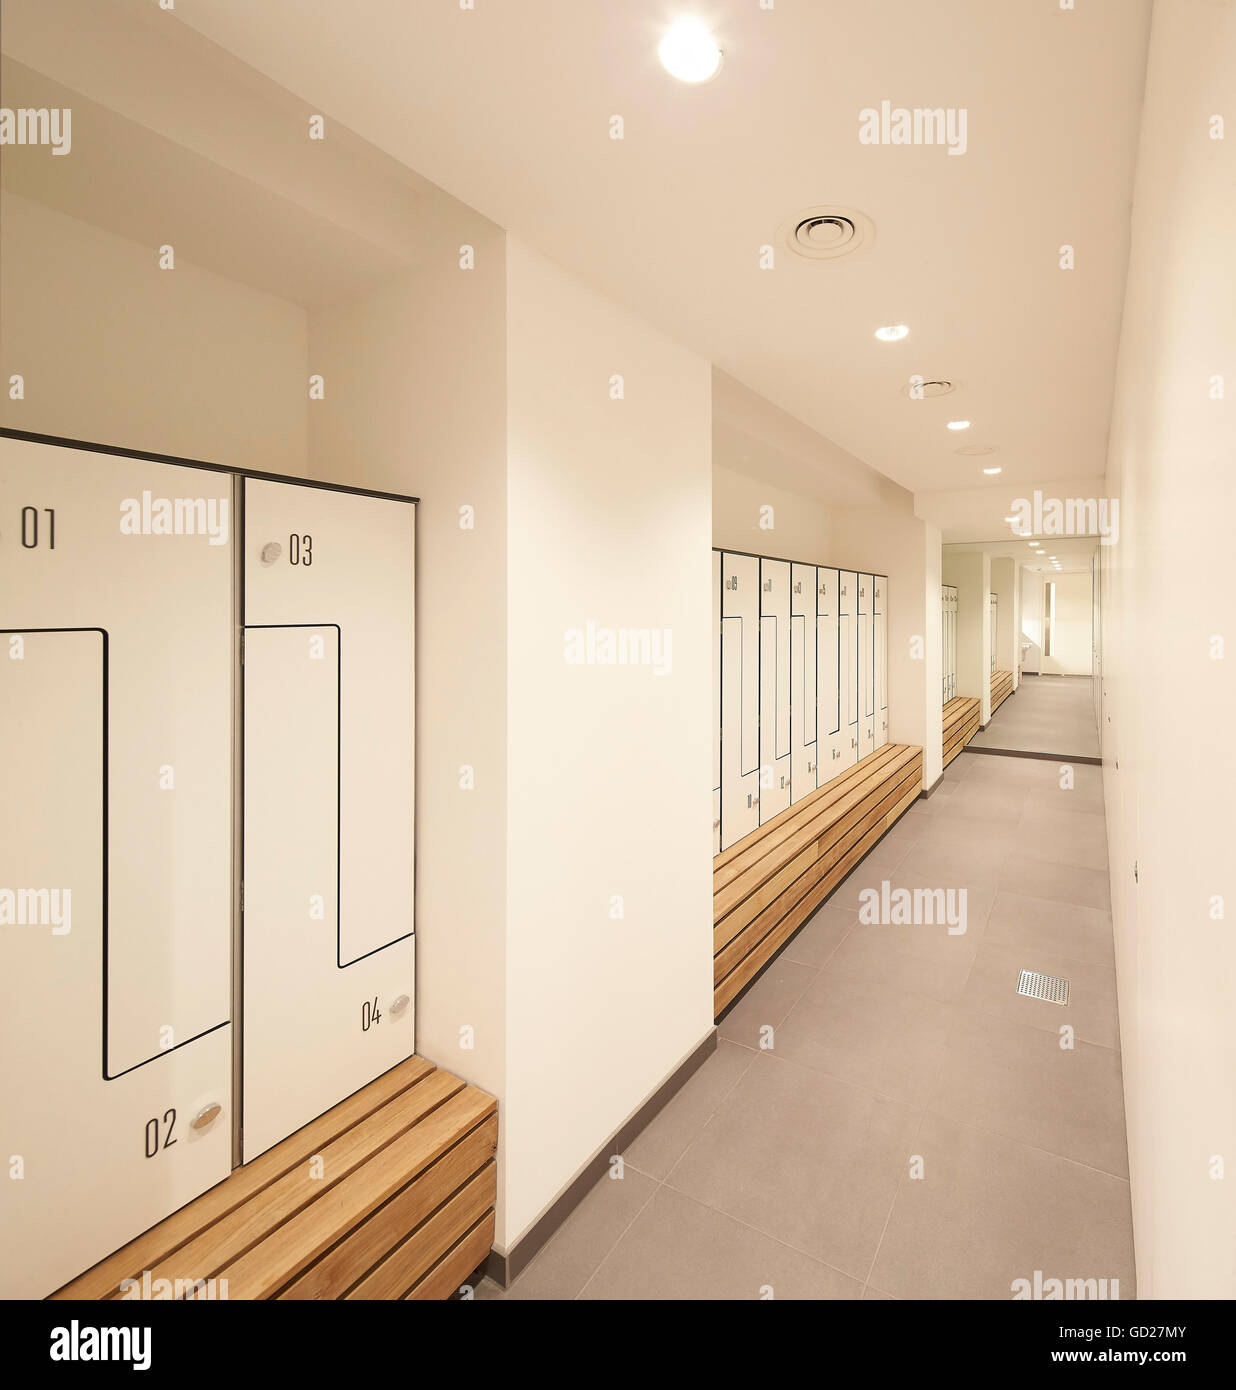 Shower facilities with lockers. Fitzroy Place, London, United Kingdom. Architect: Sheppard Robson, 2015. Stock Photo